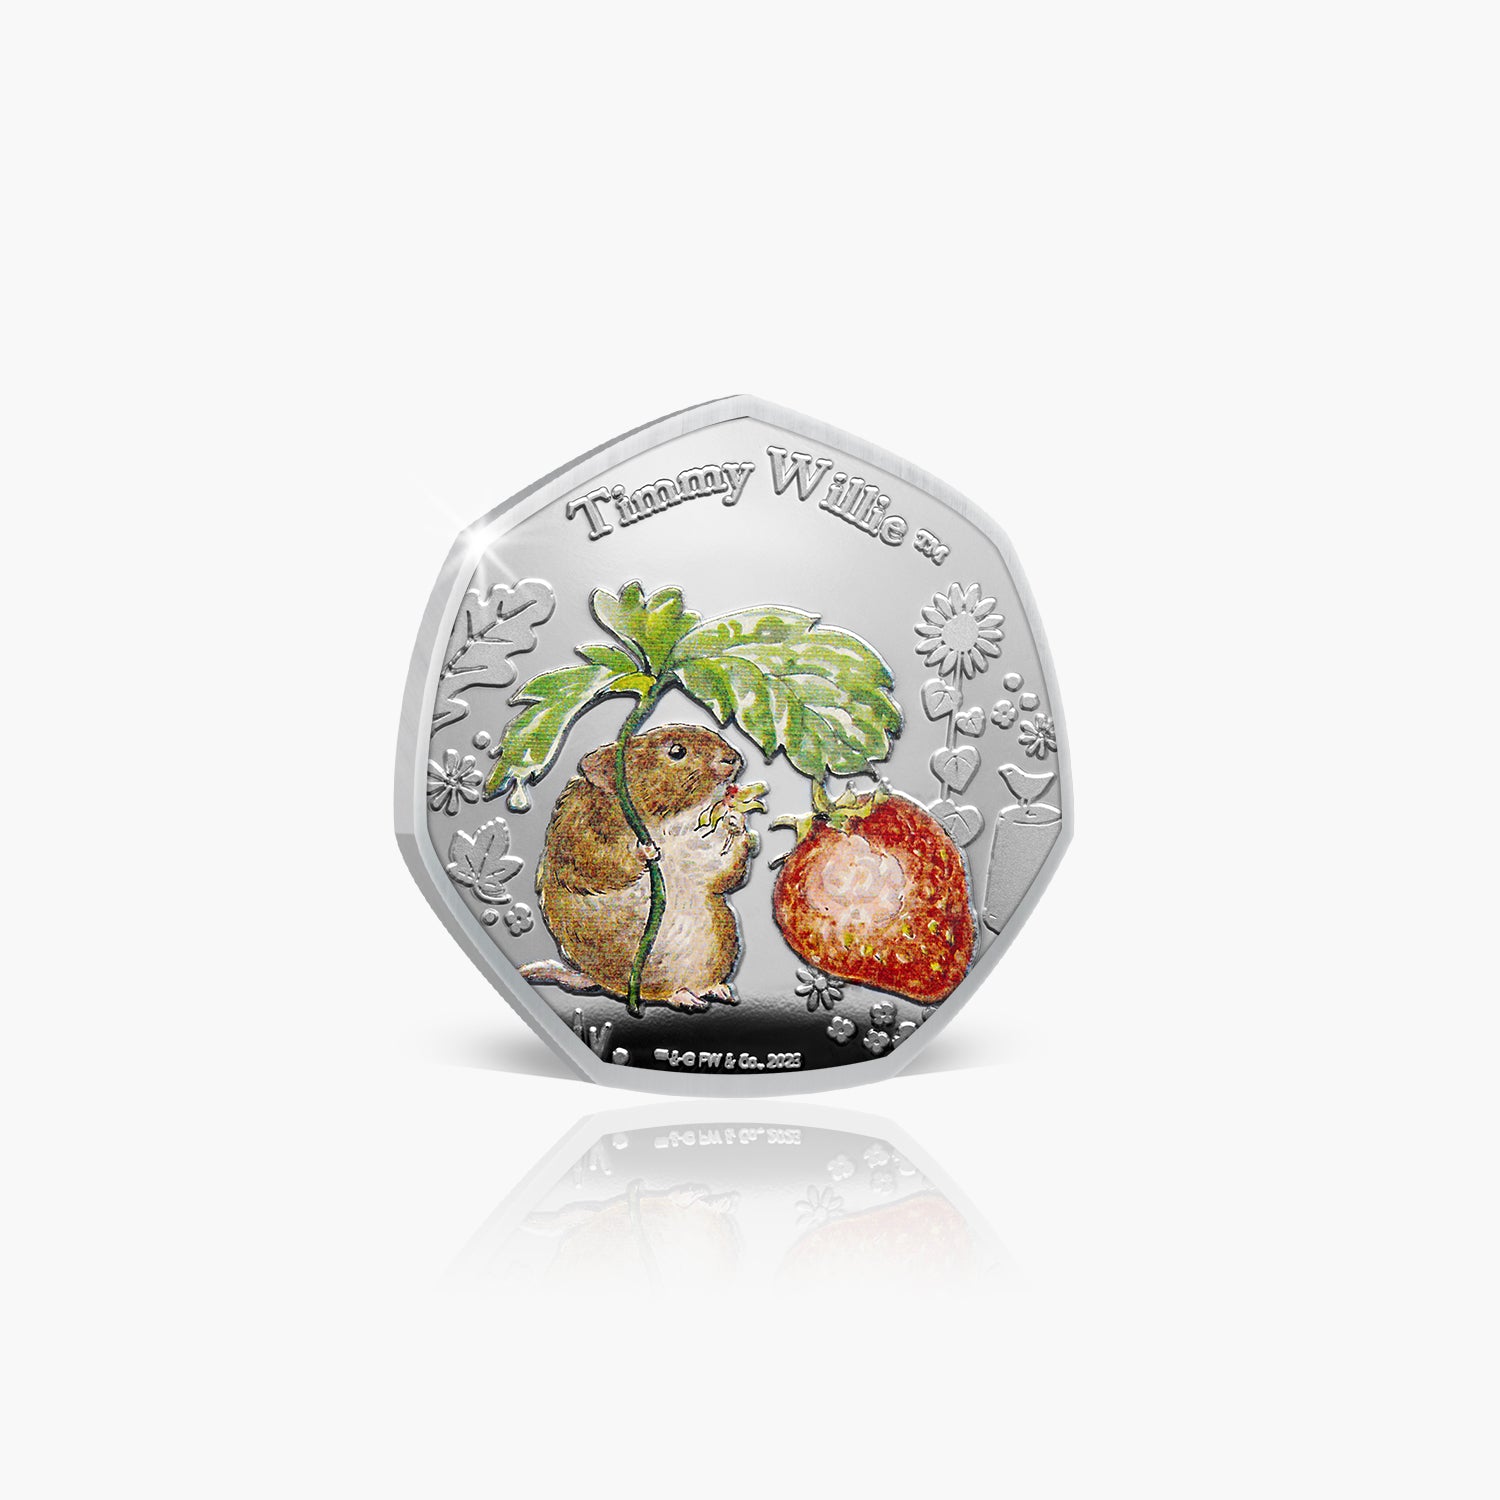 The World of Peter Rabbit 2023 Coin Collection - Timmy Willie Coin